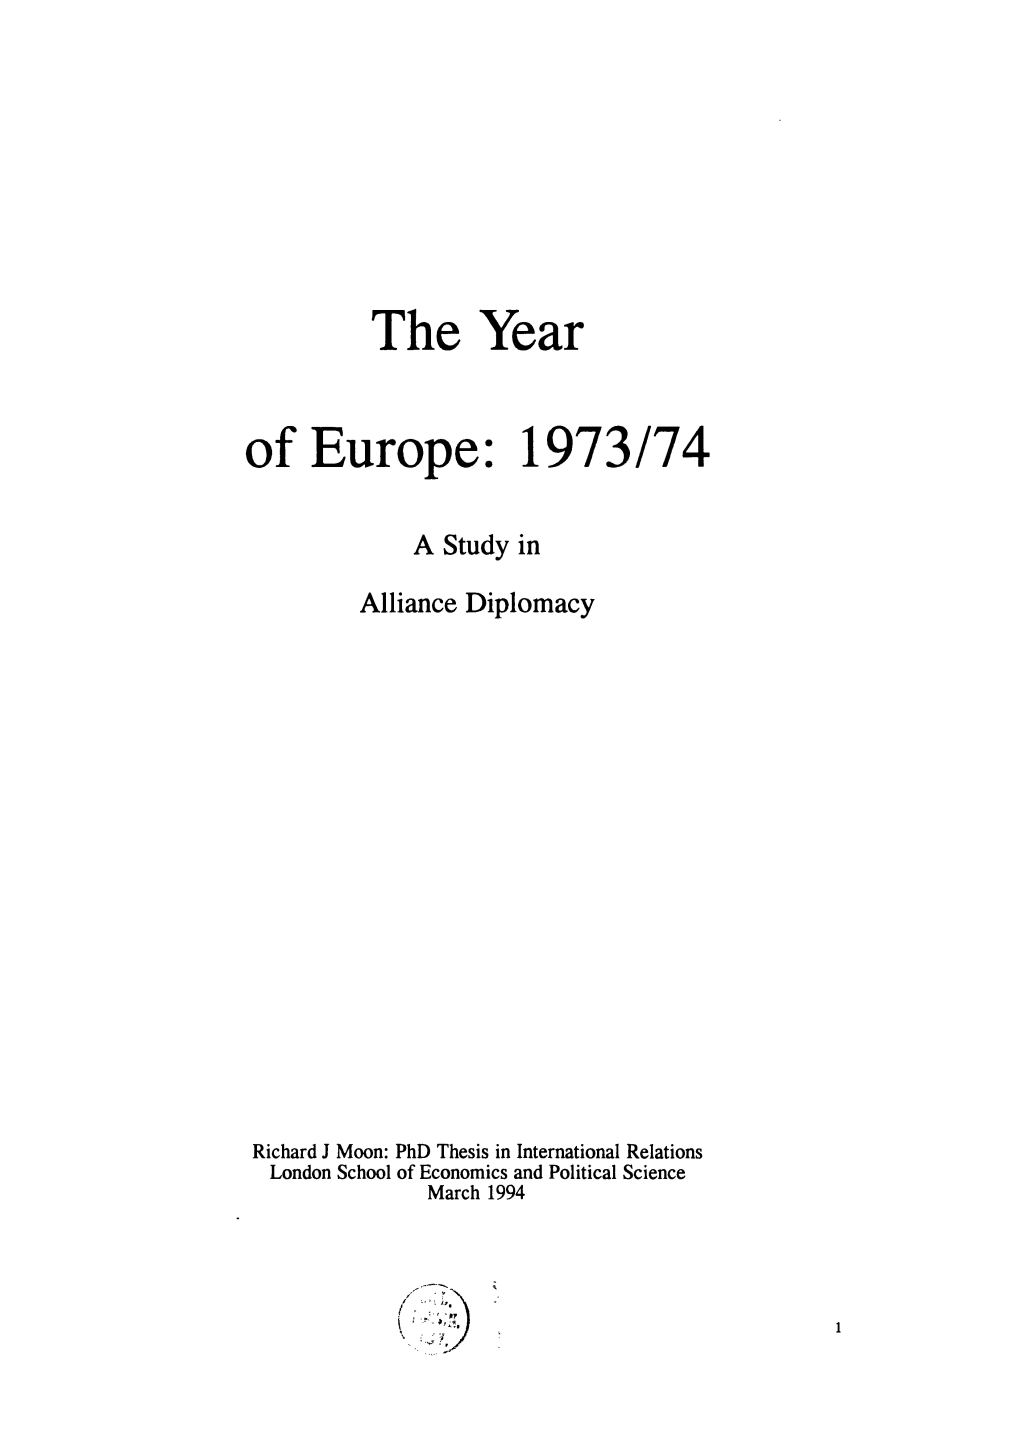 The Year of Europe: 1973/74